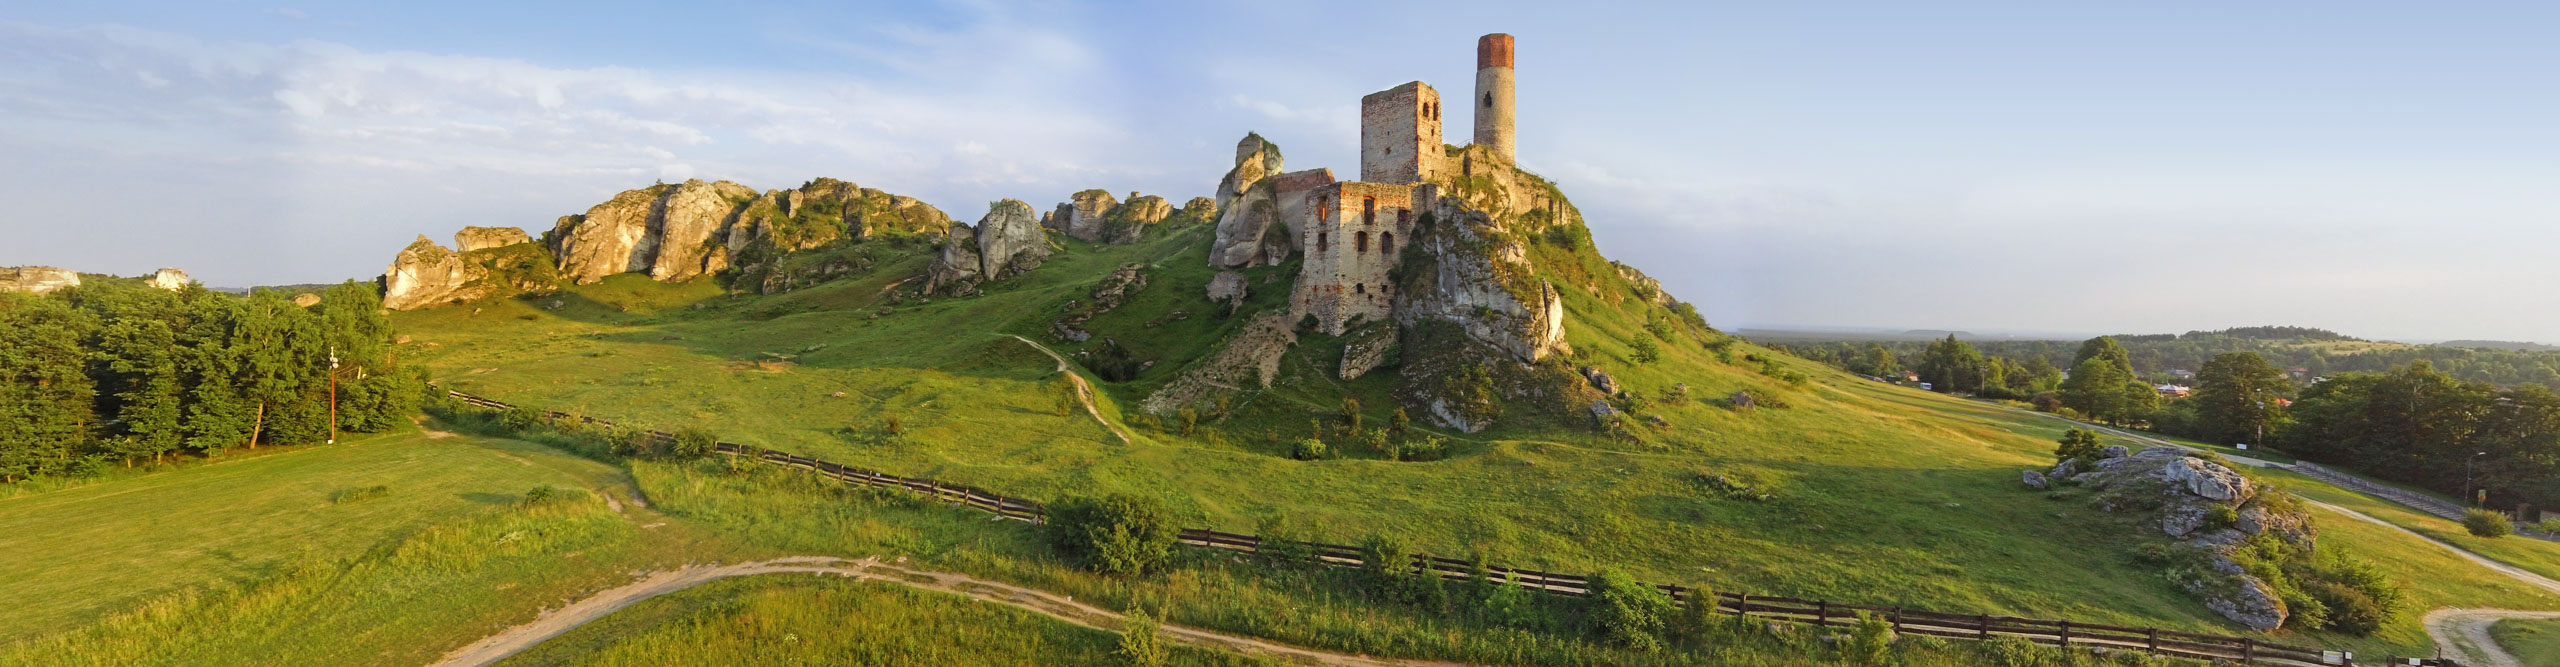 Ruins of Olsztyn castle, on the hill in the late afternoon glow in Poland